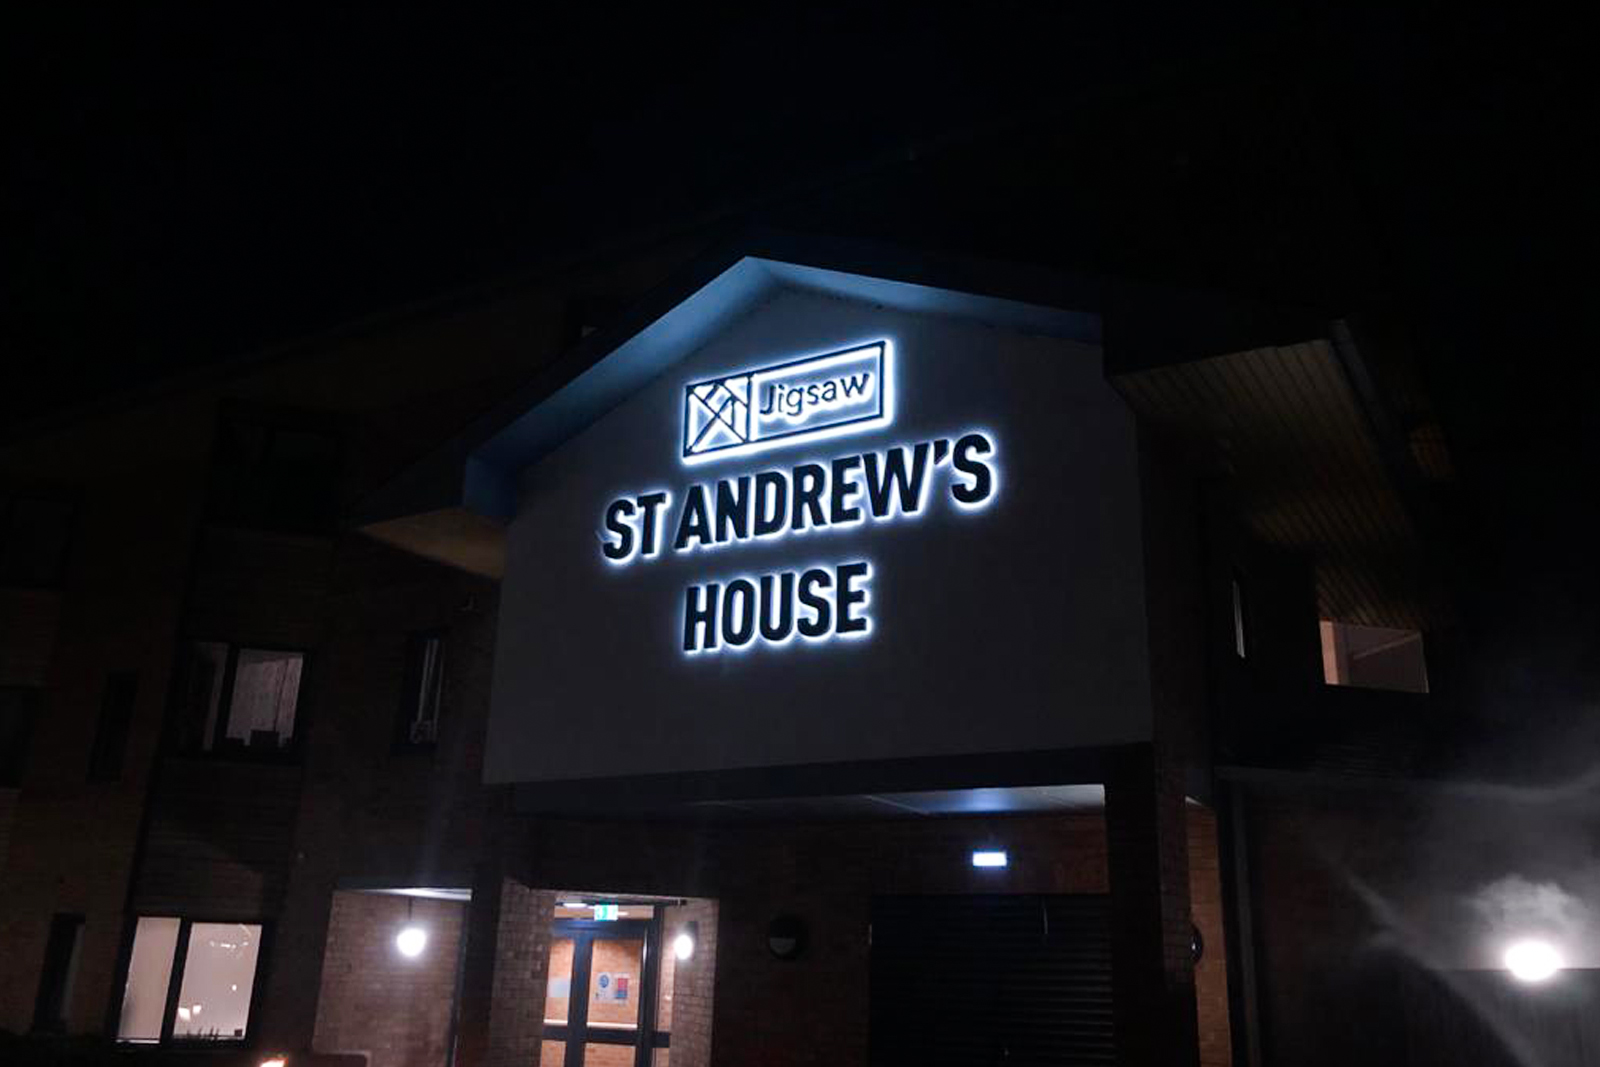 Re-brand and refurbishment of the existing signage and illuminated logo as part of the re-brand for Jigsaw Homes.